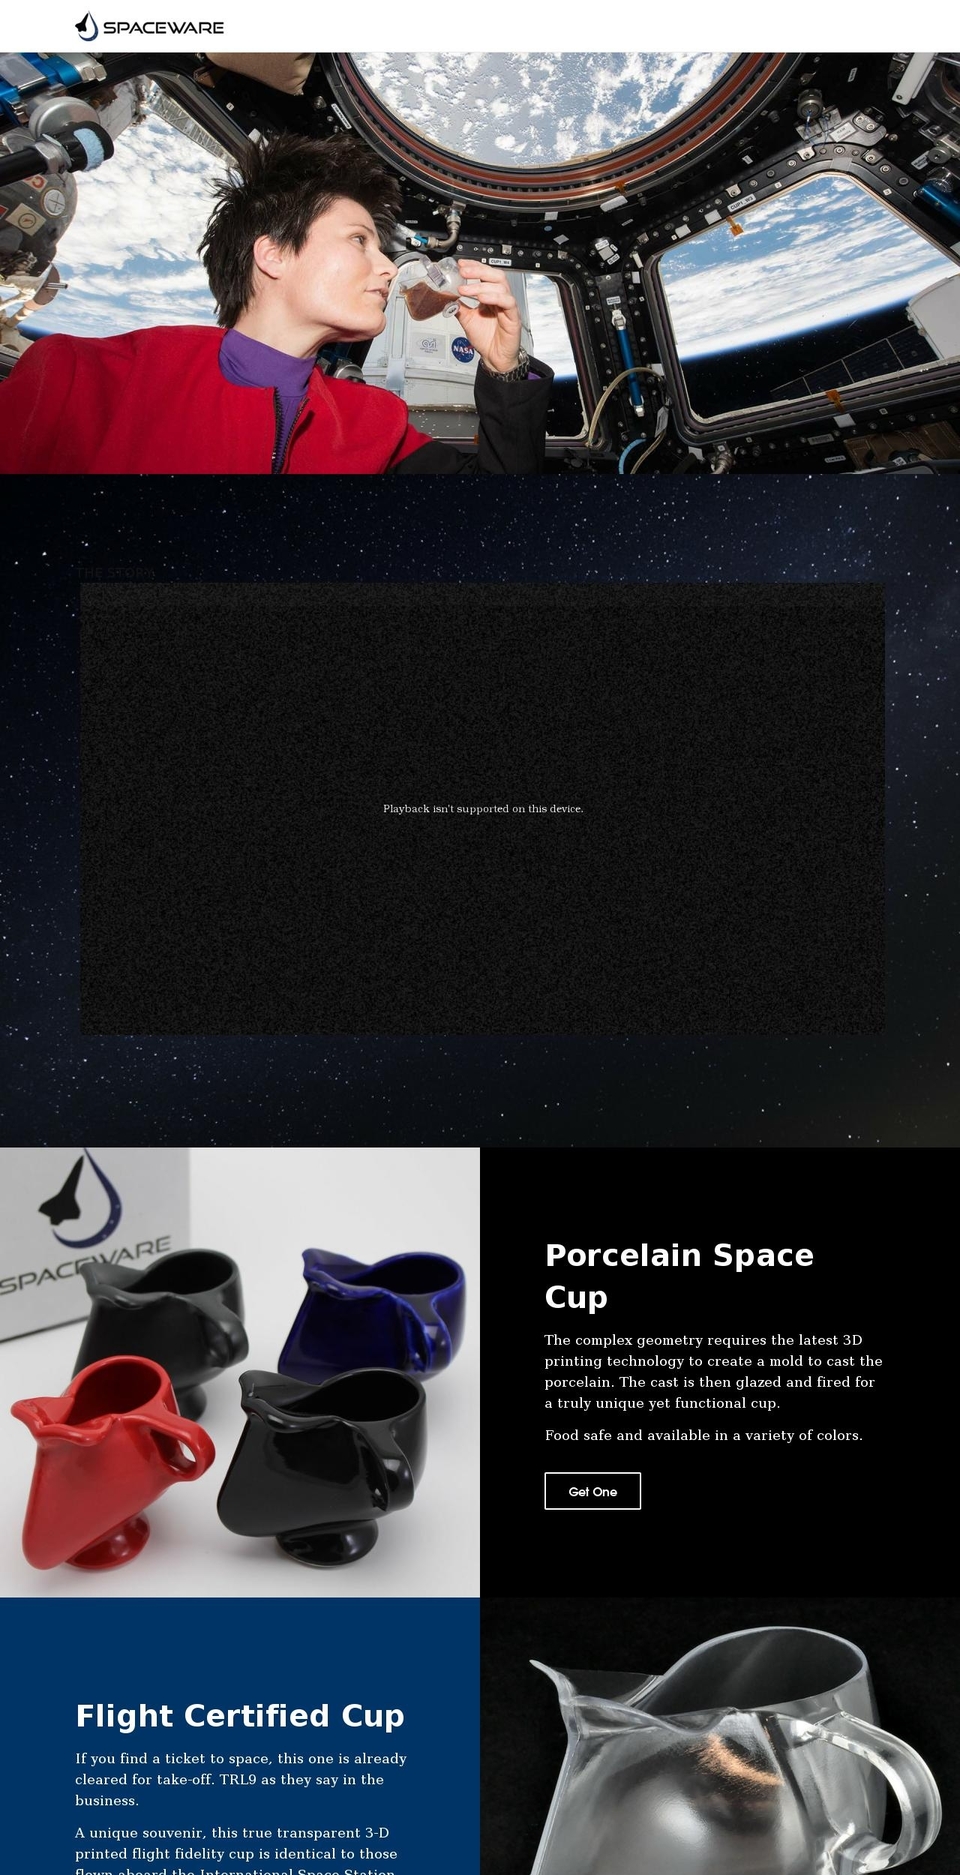 Jumpstart Shopify theme site example spaceware.co